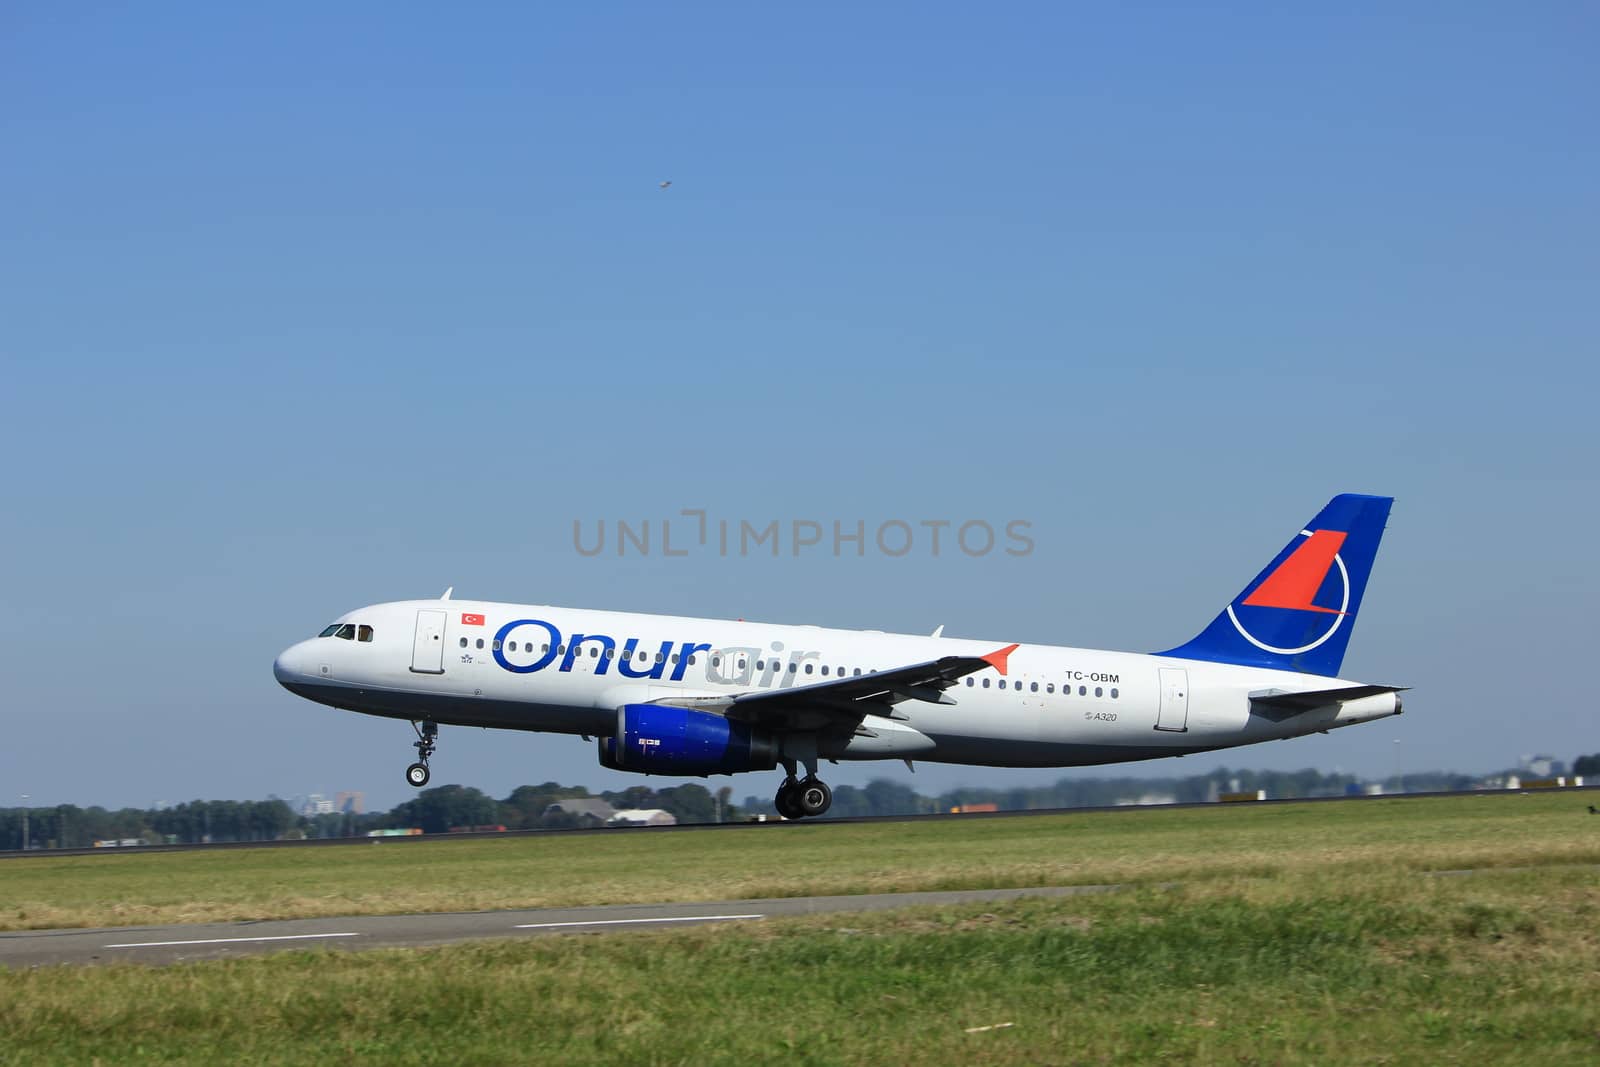 Amsterdam, the Netherlands  - August, 18th 2016: TC-OBM Onur Air Airbus A320-232,
taking off from Polderbaan Runway Amsterdam Airport Schiphol